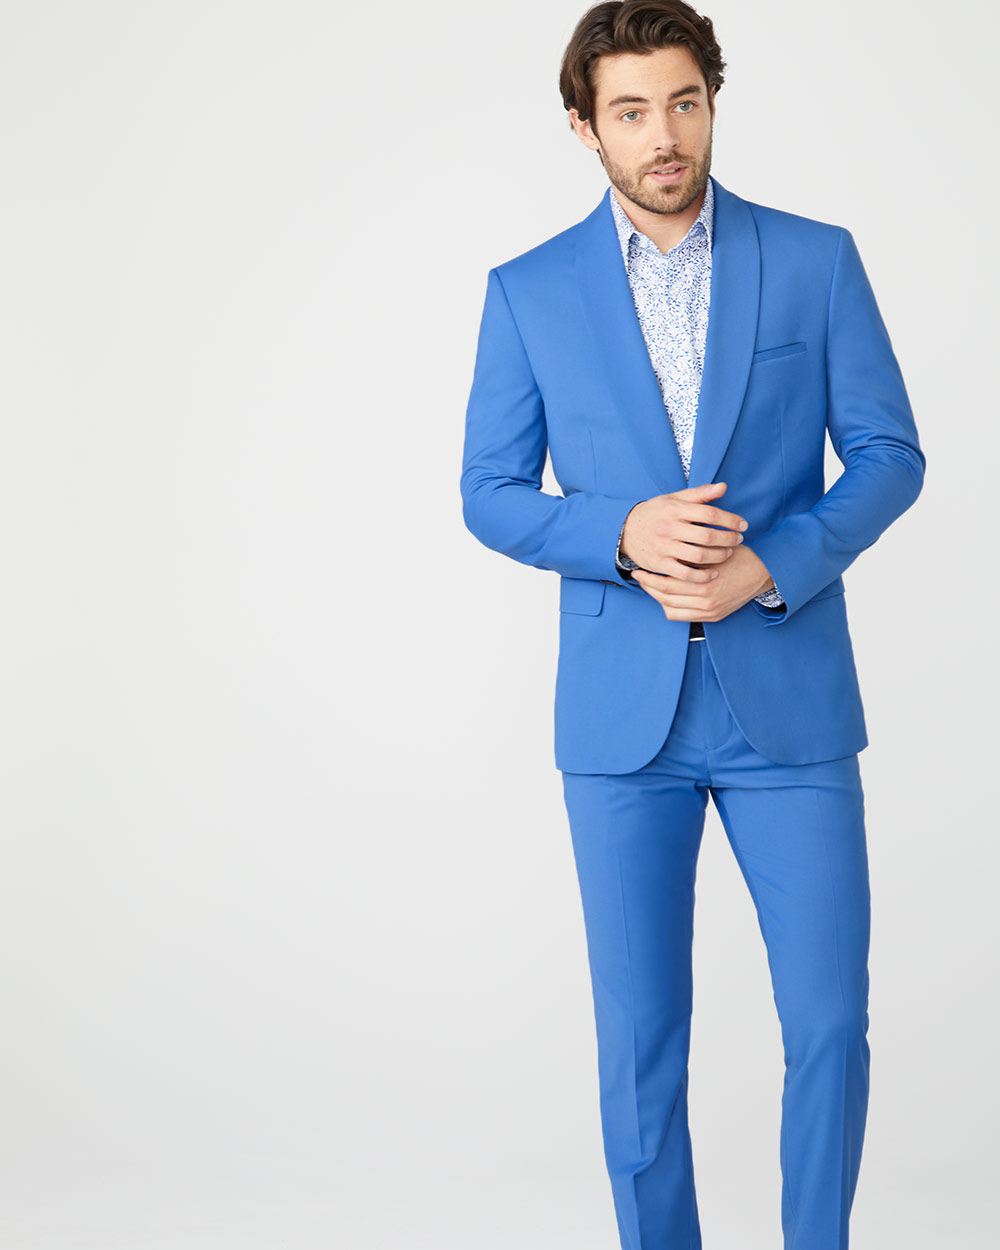 Tailored Fit Bright blue suit blazer | RW&CO.